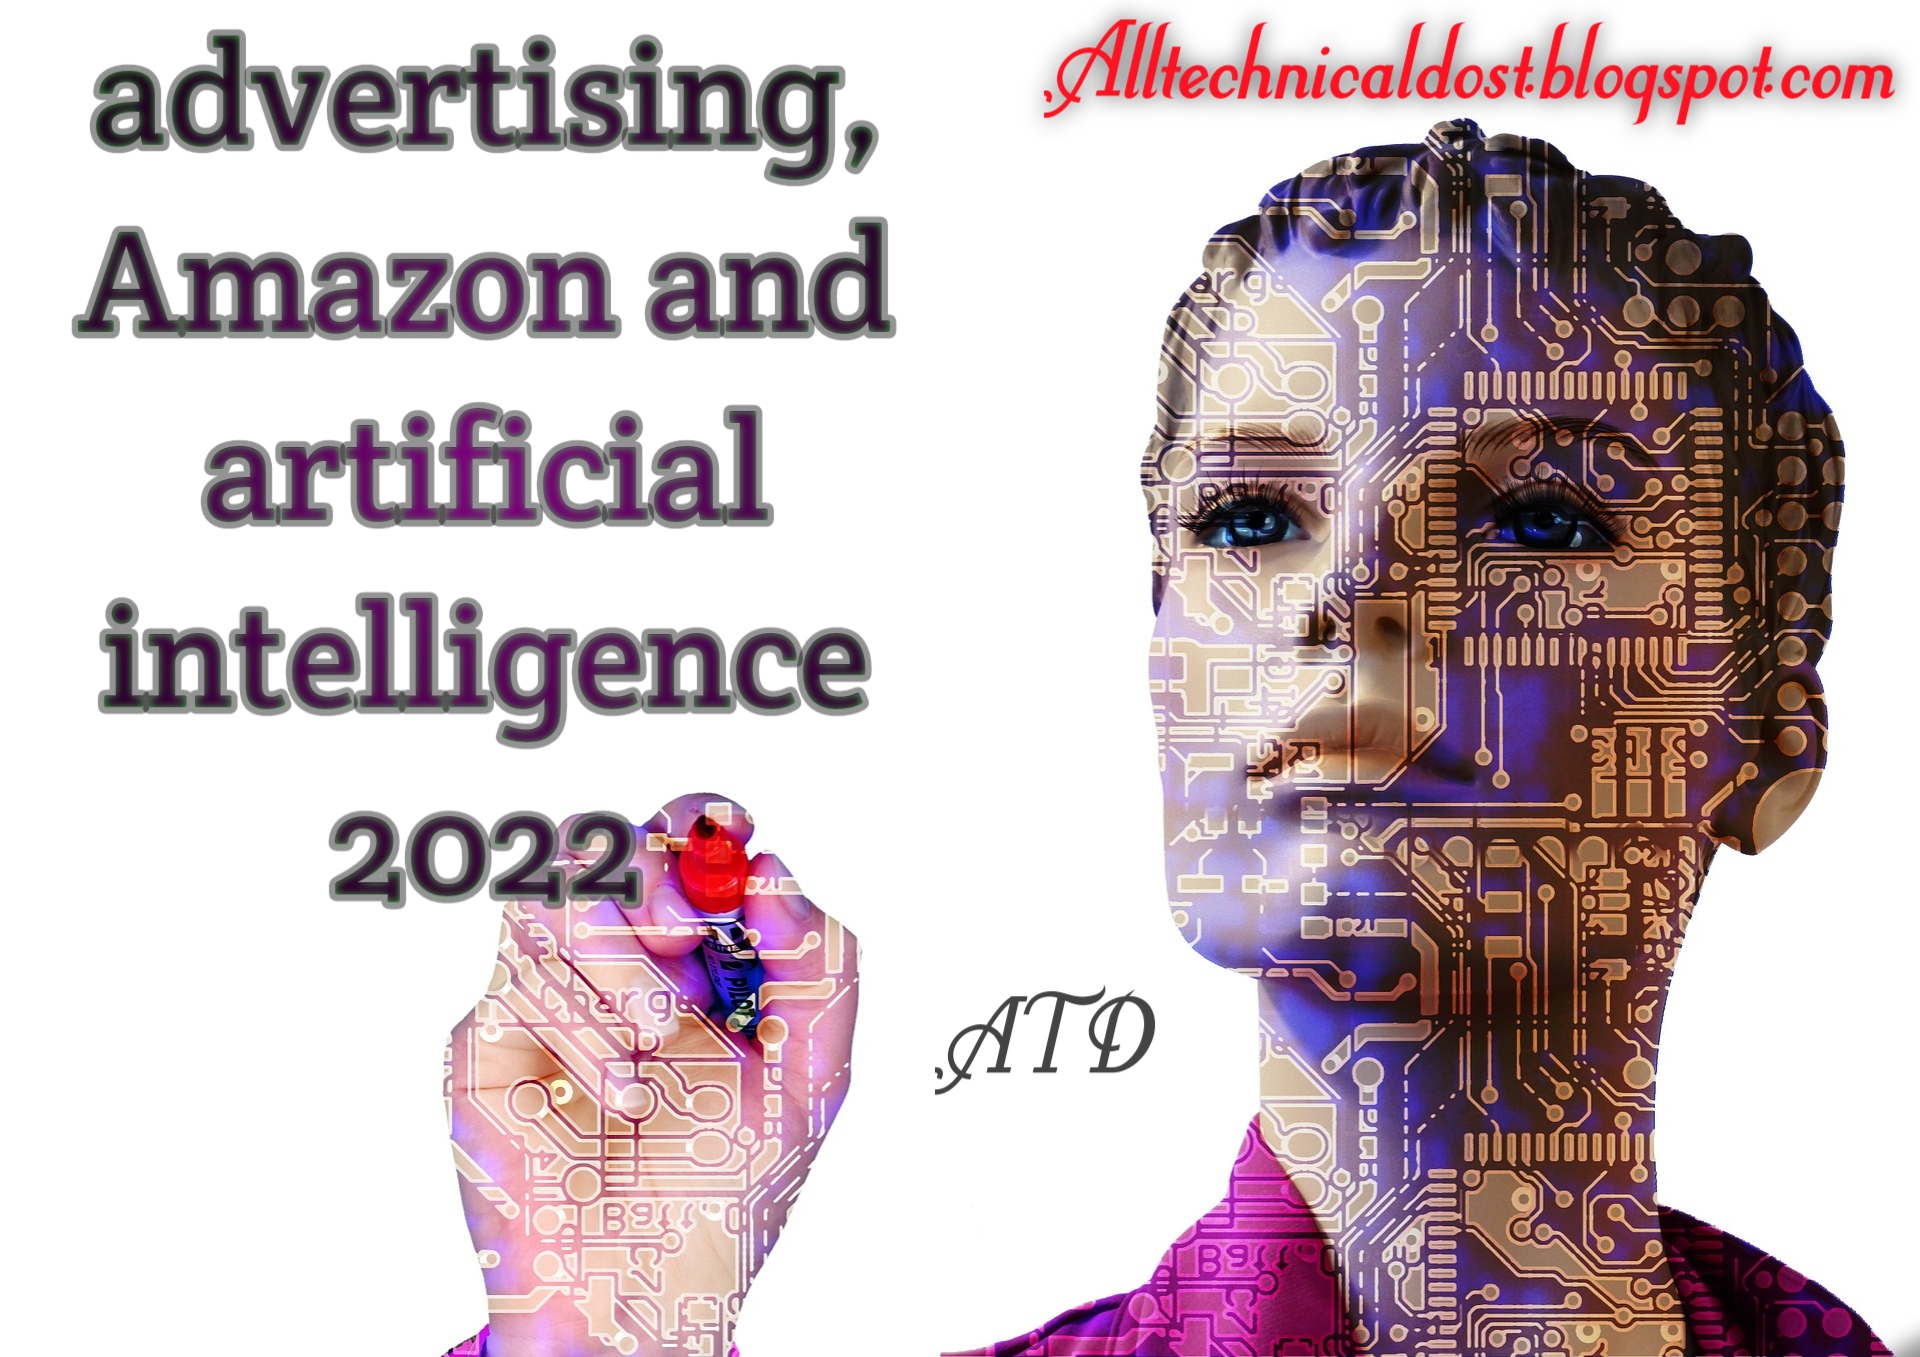 advertising, Amazon and artificial intelligence